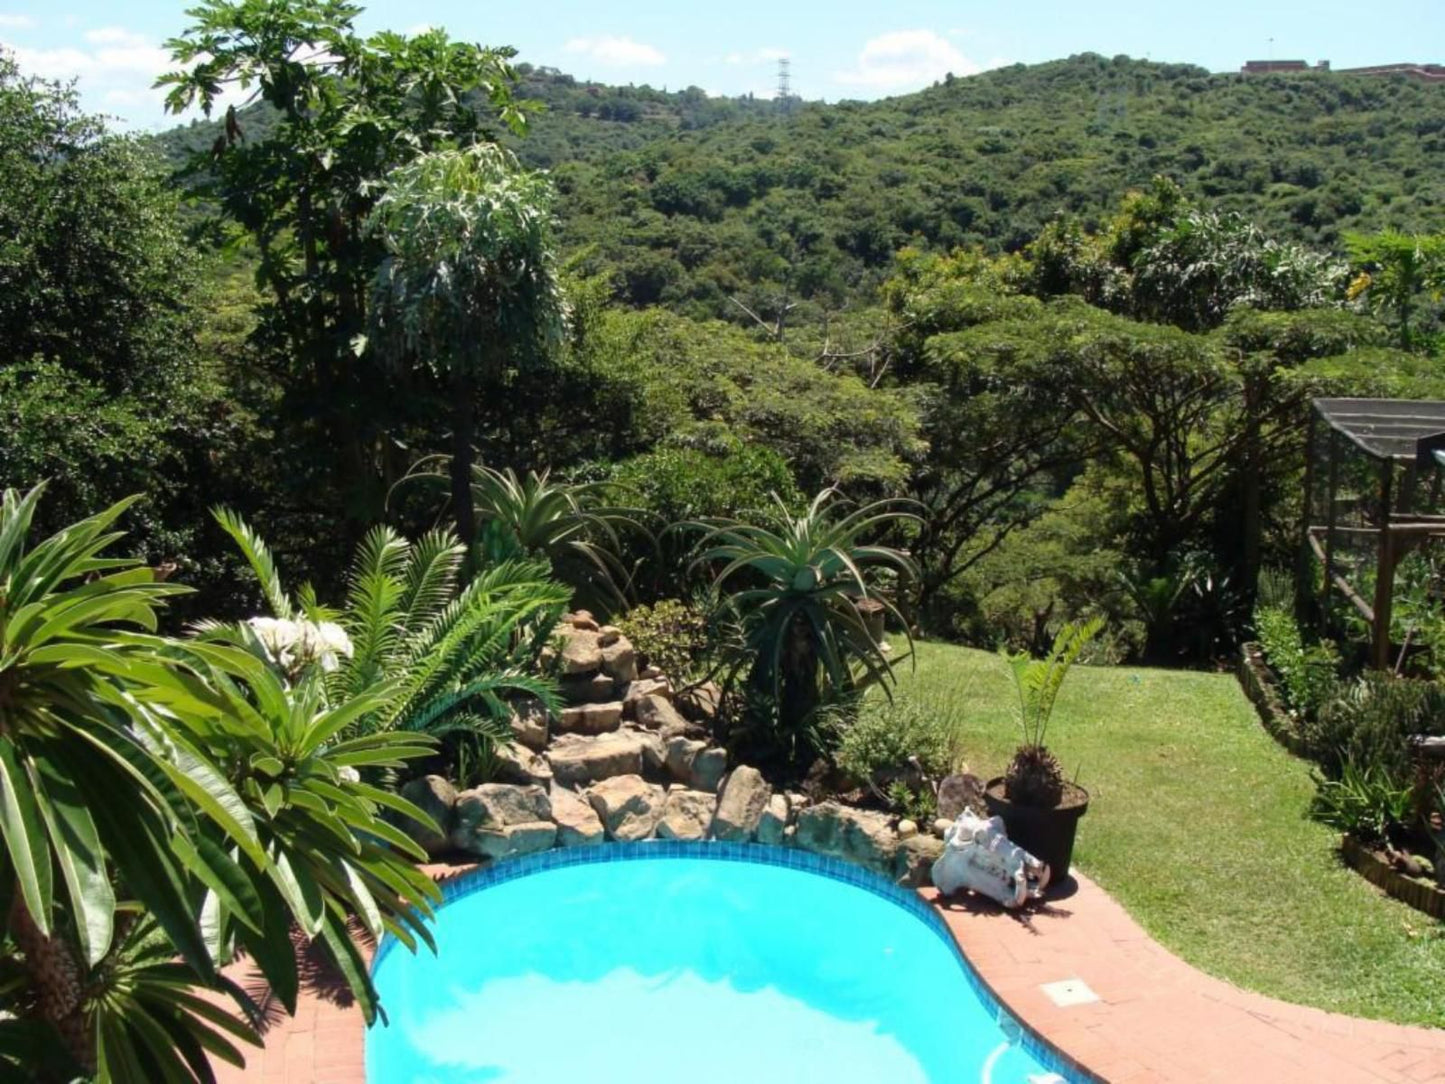 Roosfontein Bed And Breakfast And Conference Room Queensburgh Durban Kwazulu Natal South Africa Garden, Nature, Plant, Swimming Pool